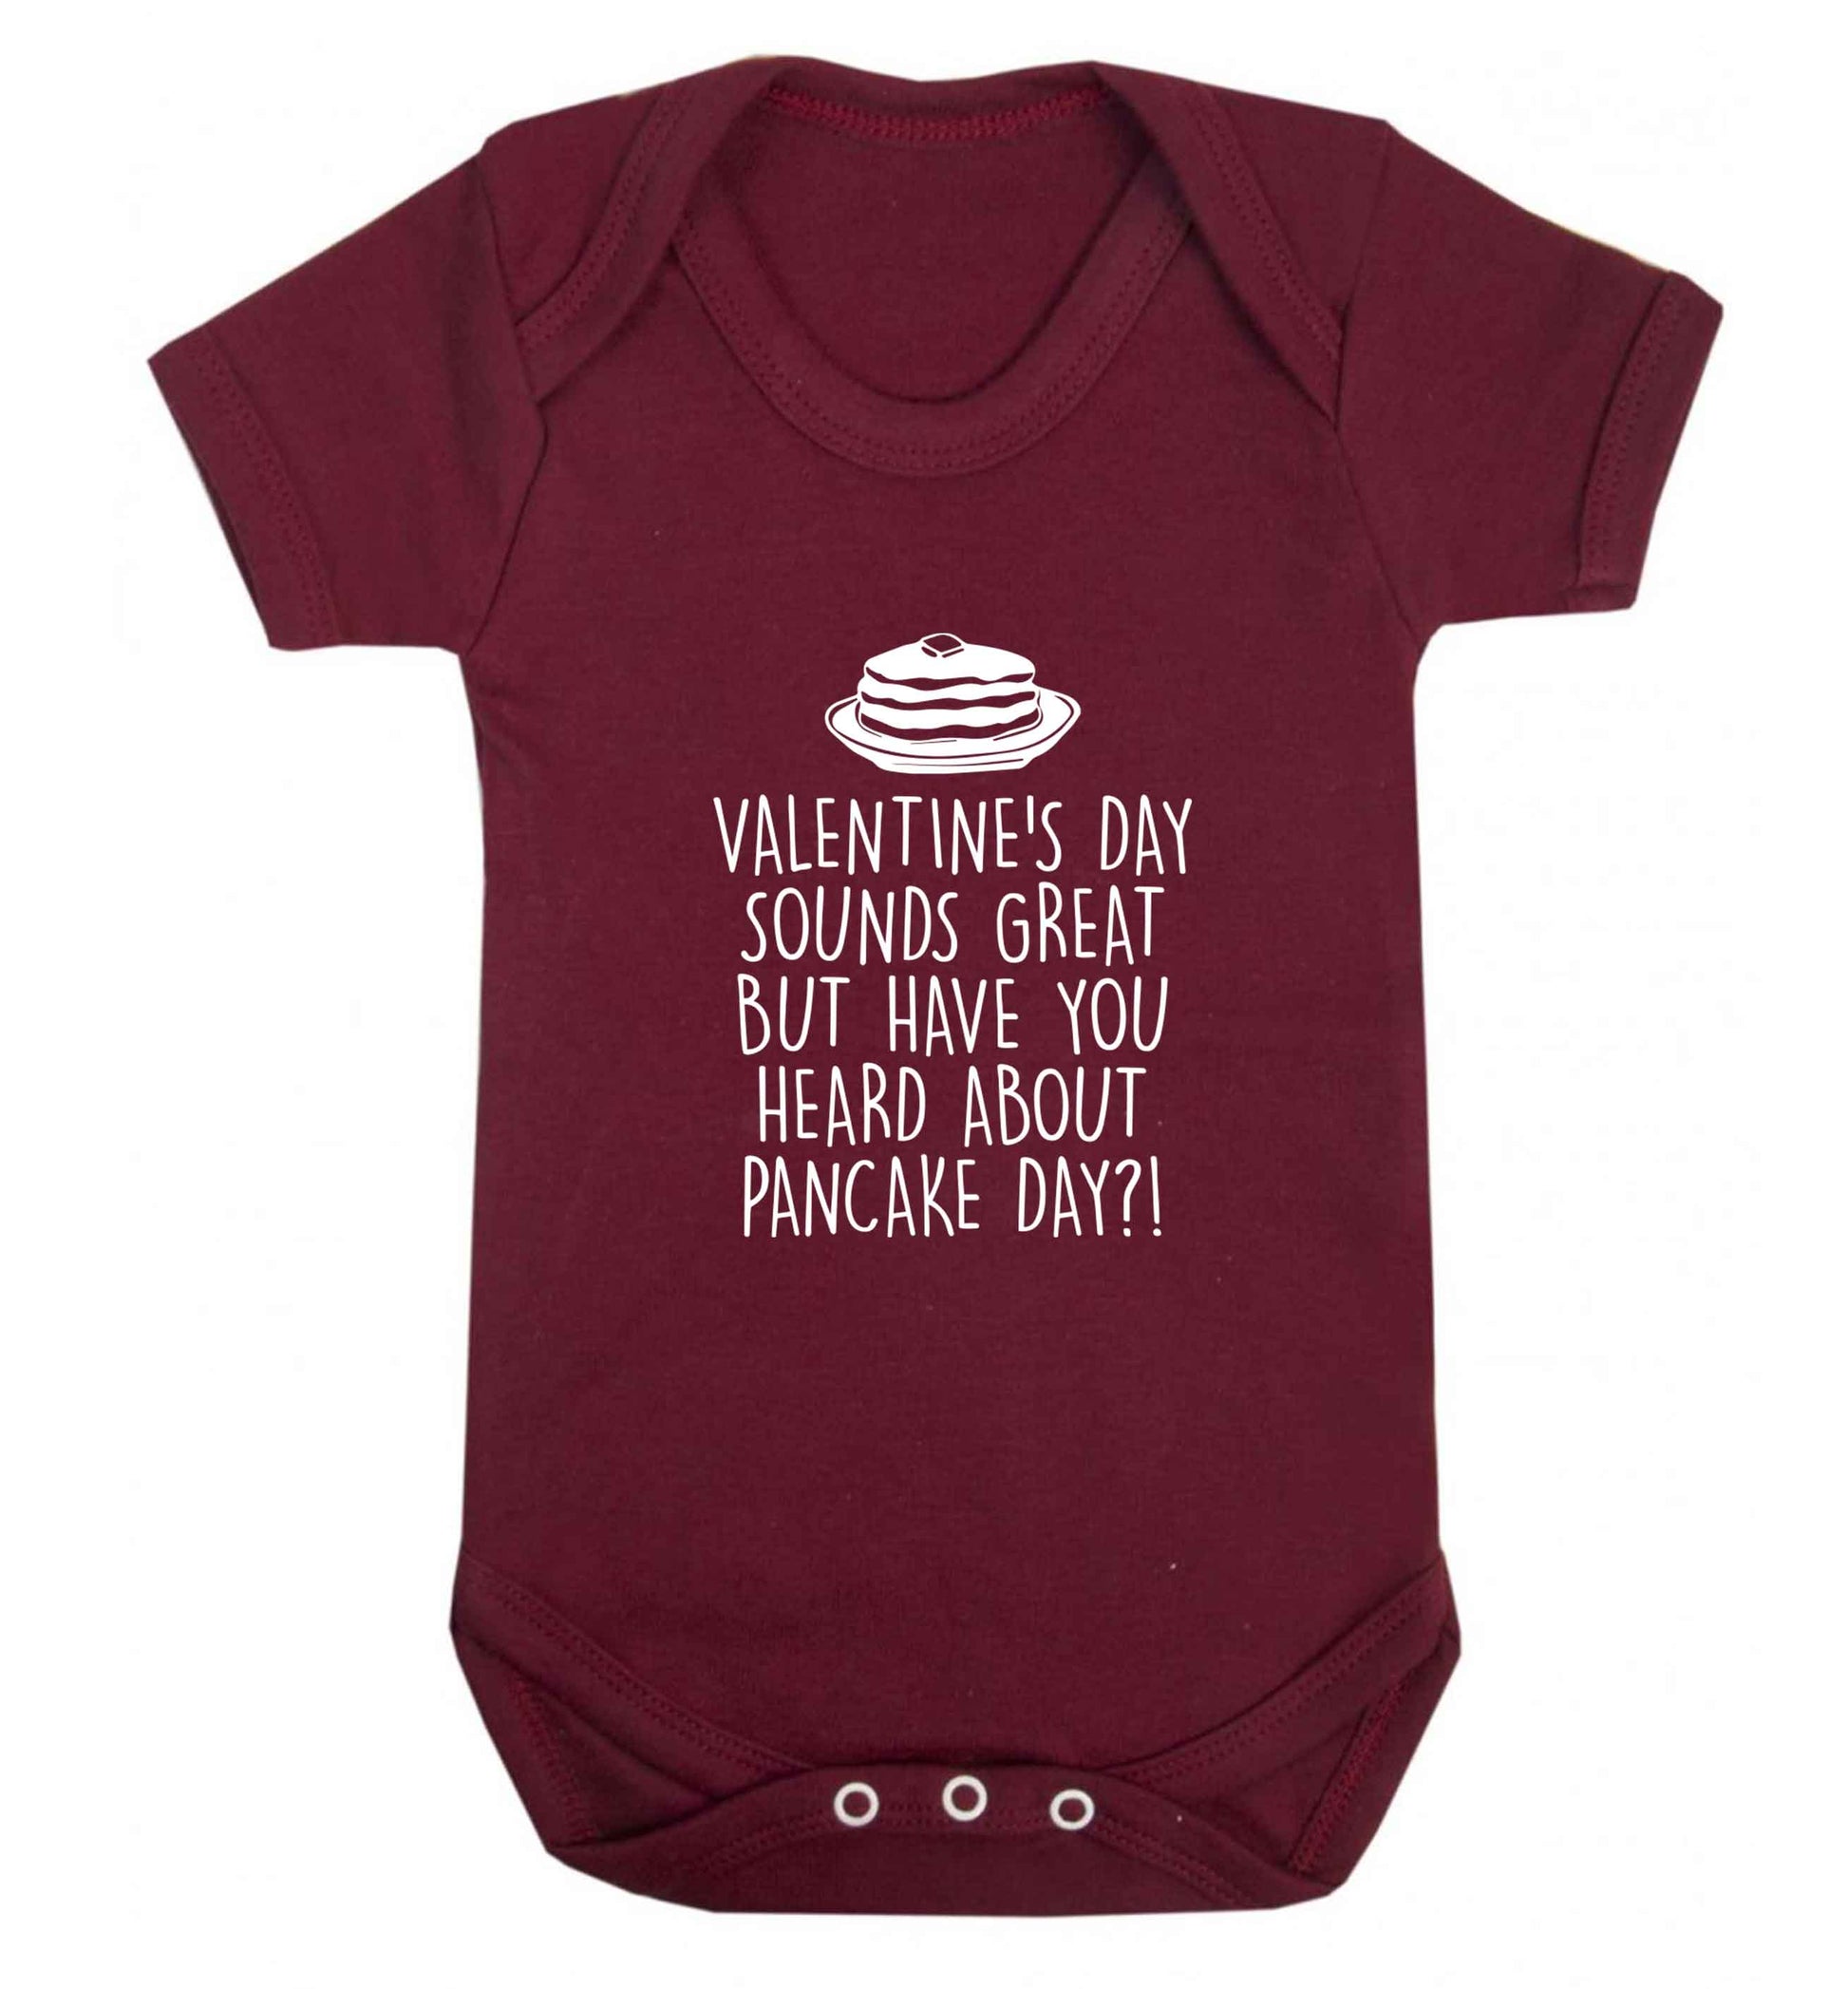 Valentine's day sounds great but have you heard about pancake day?! baby vest maroon 18-24 months